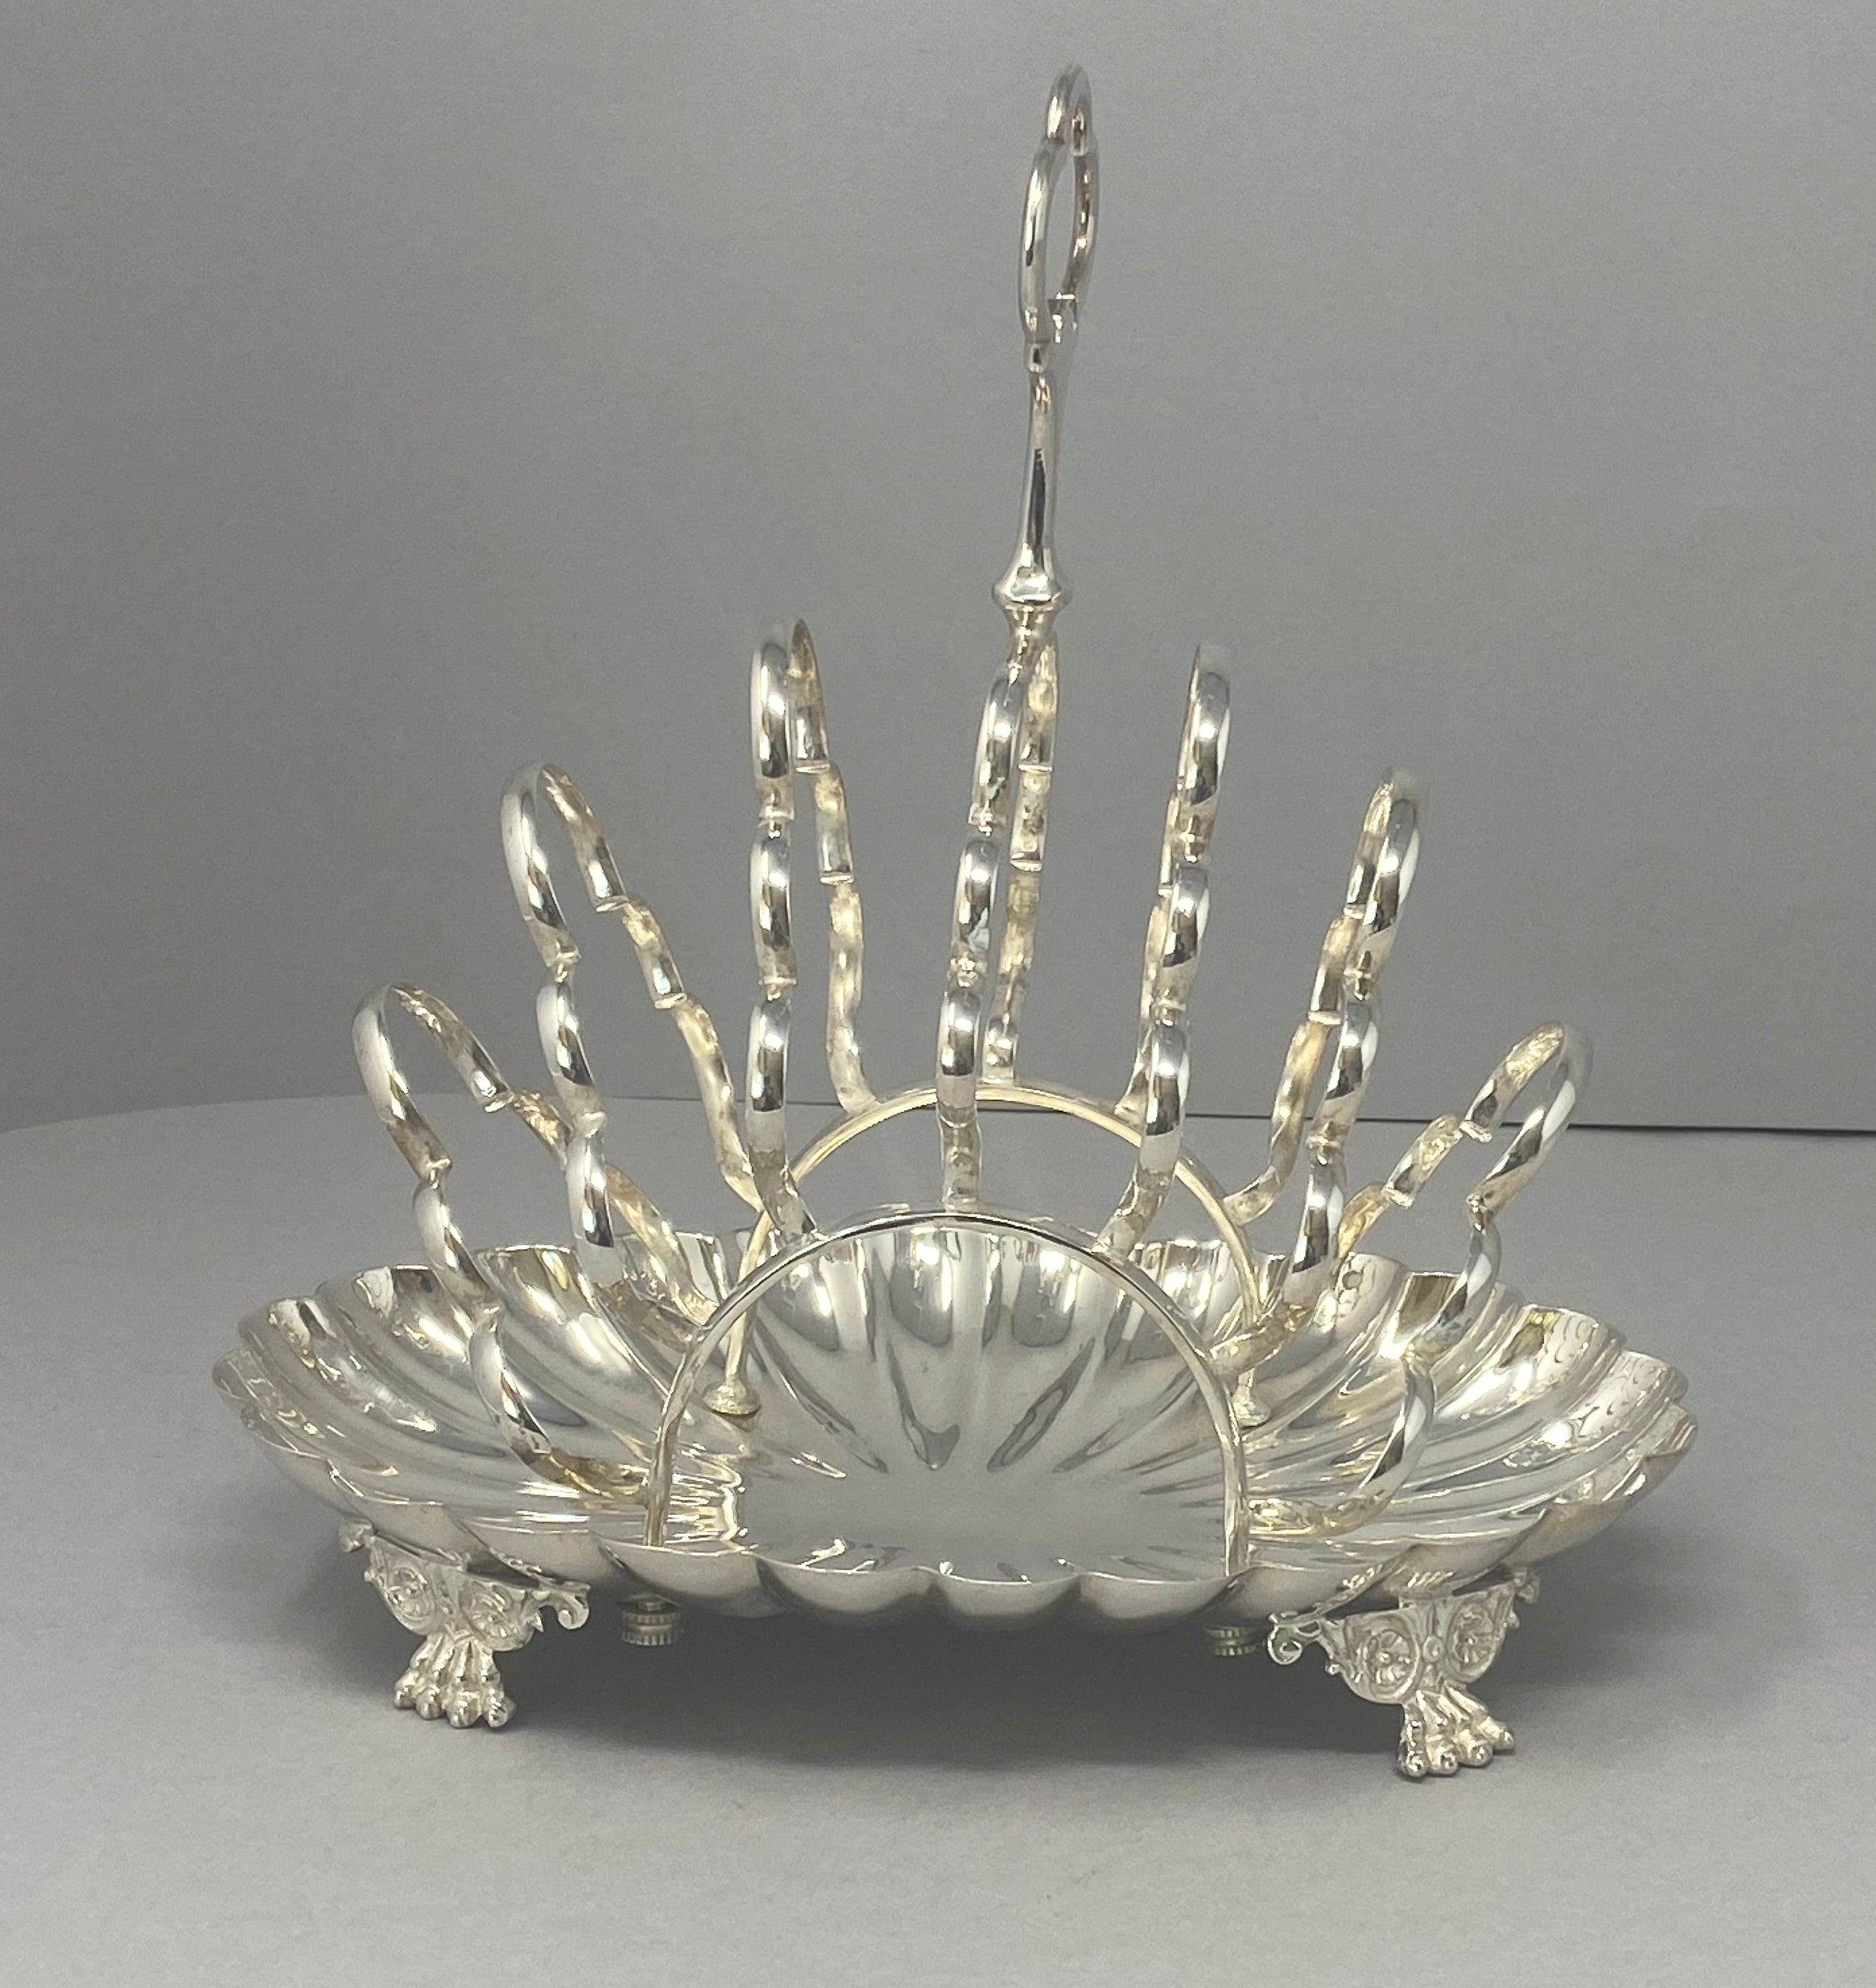 Antique Silver Plated Toast Rack